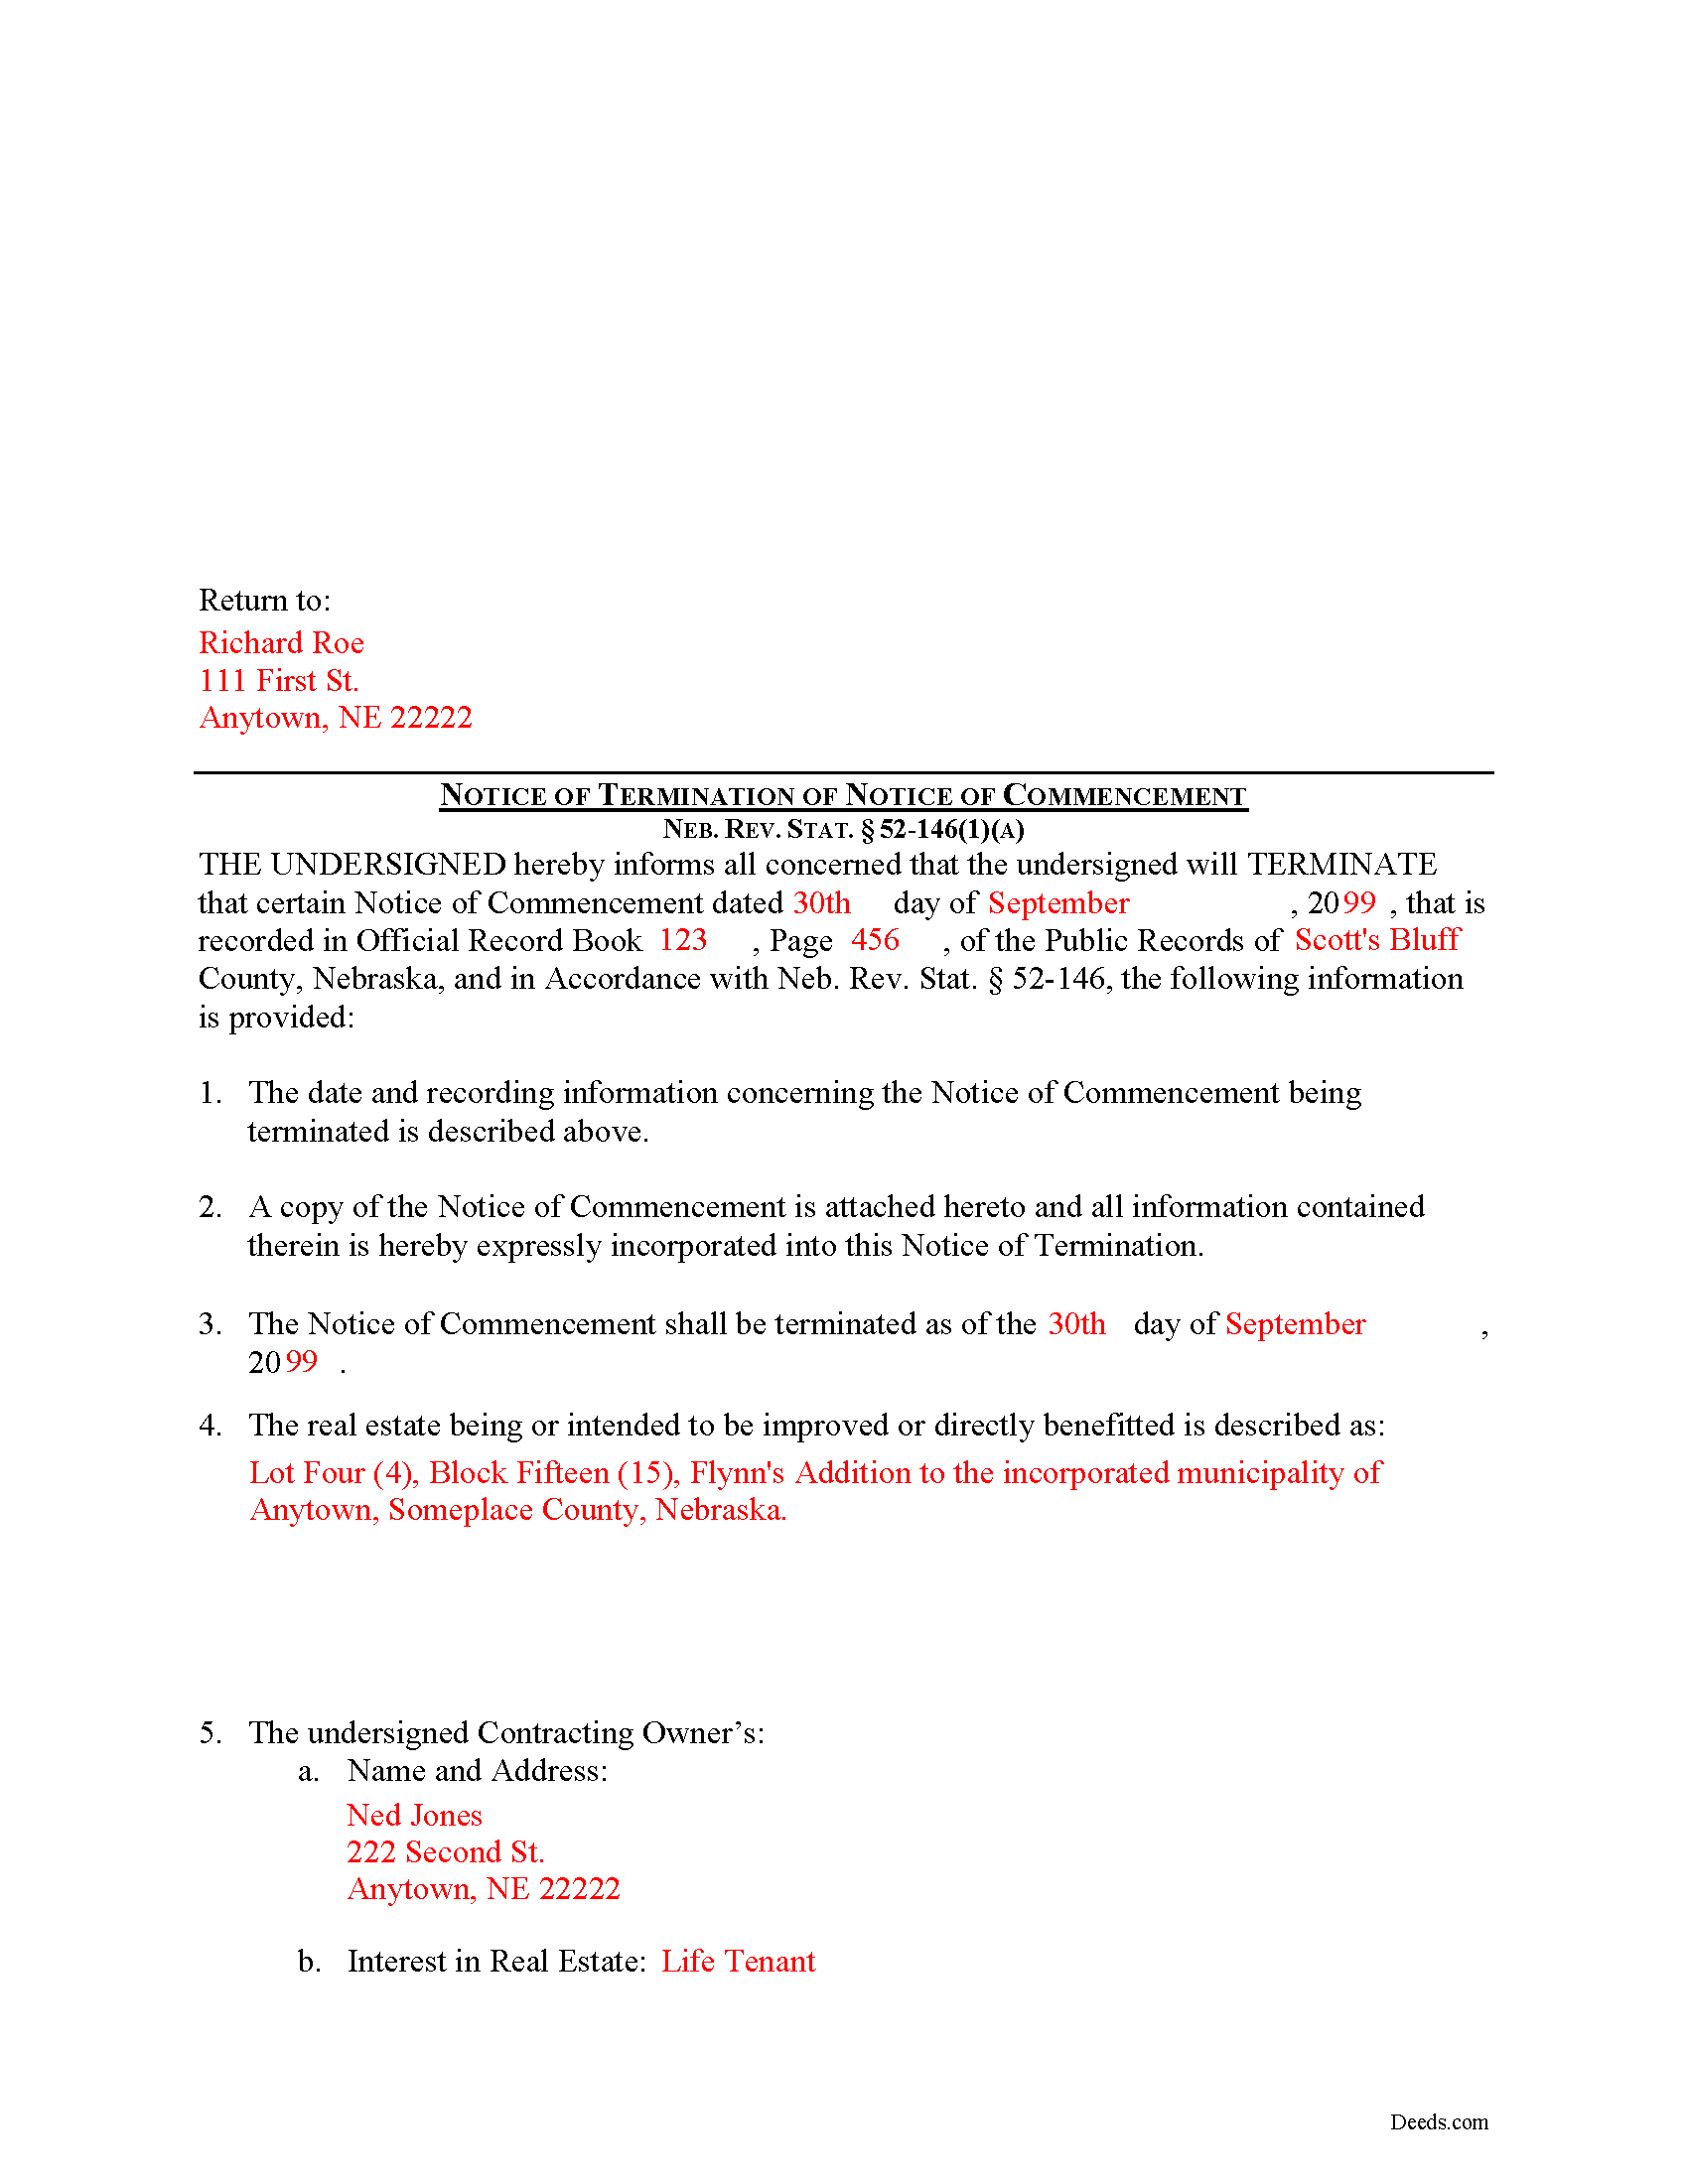 Completed Example of the Notice of Termination Document